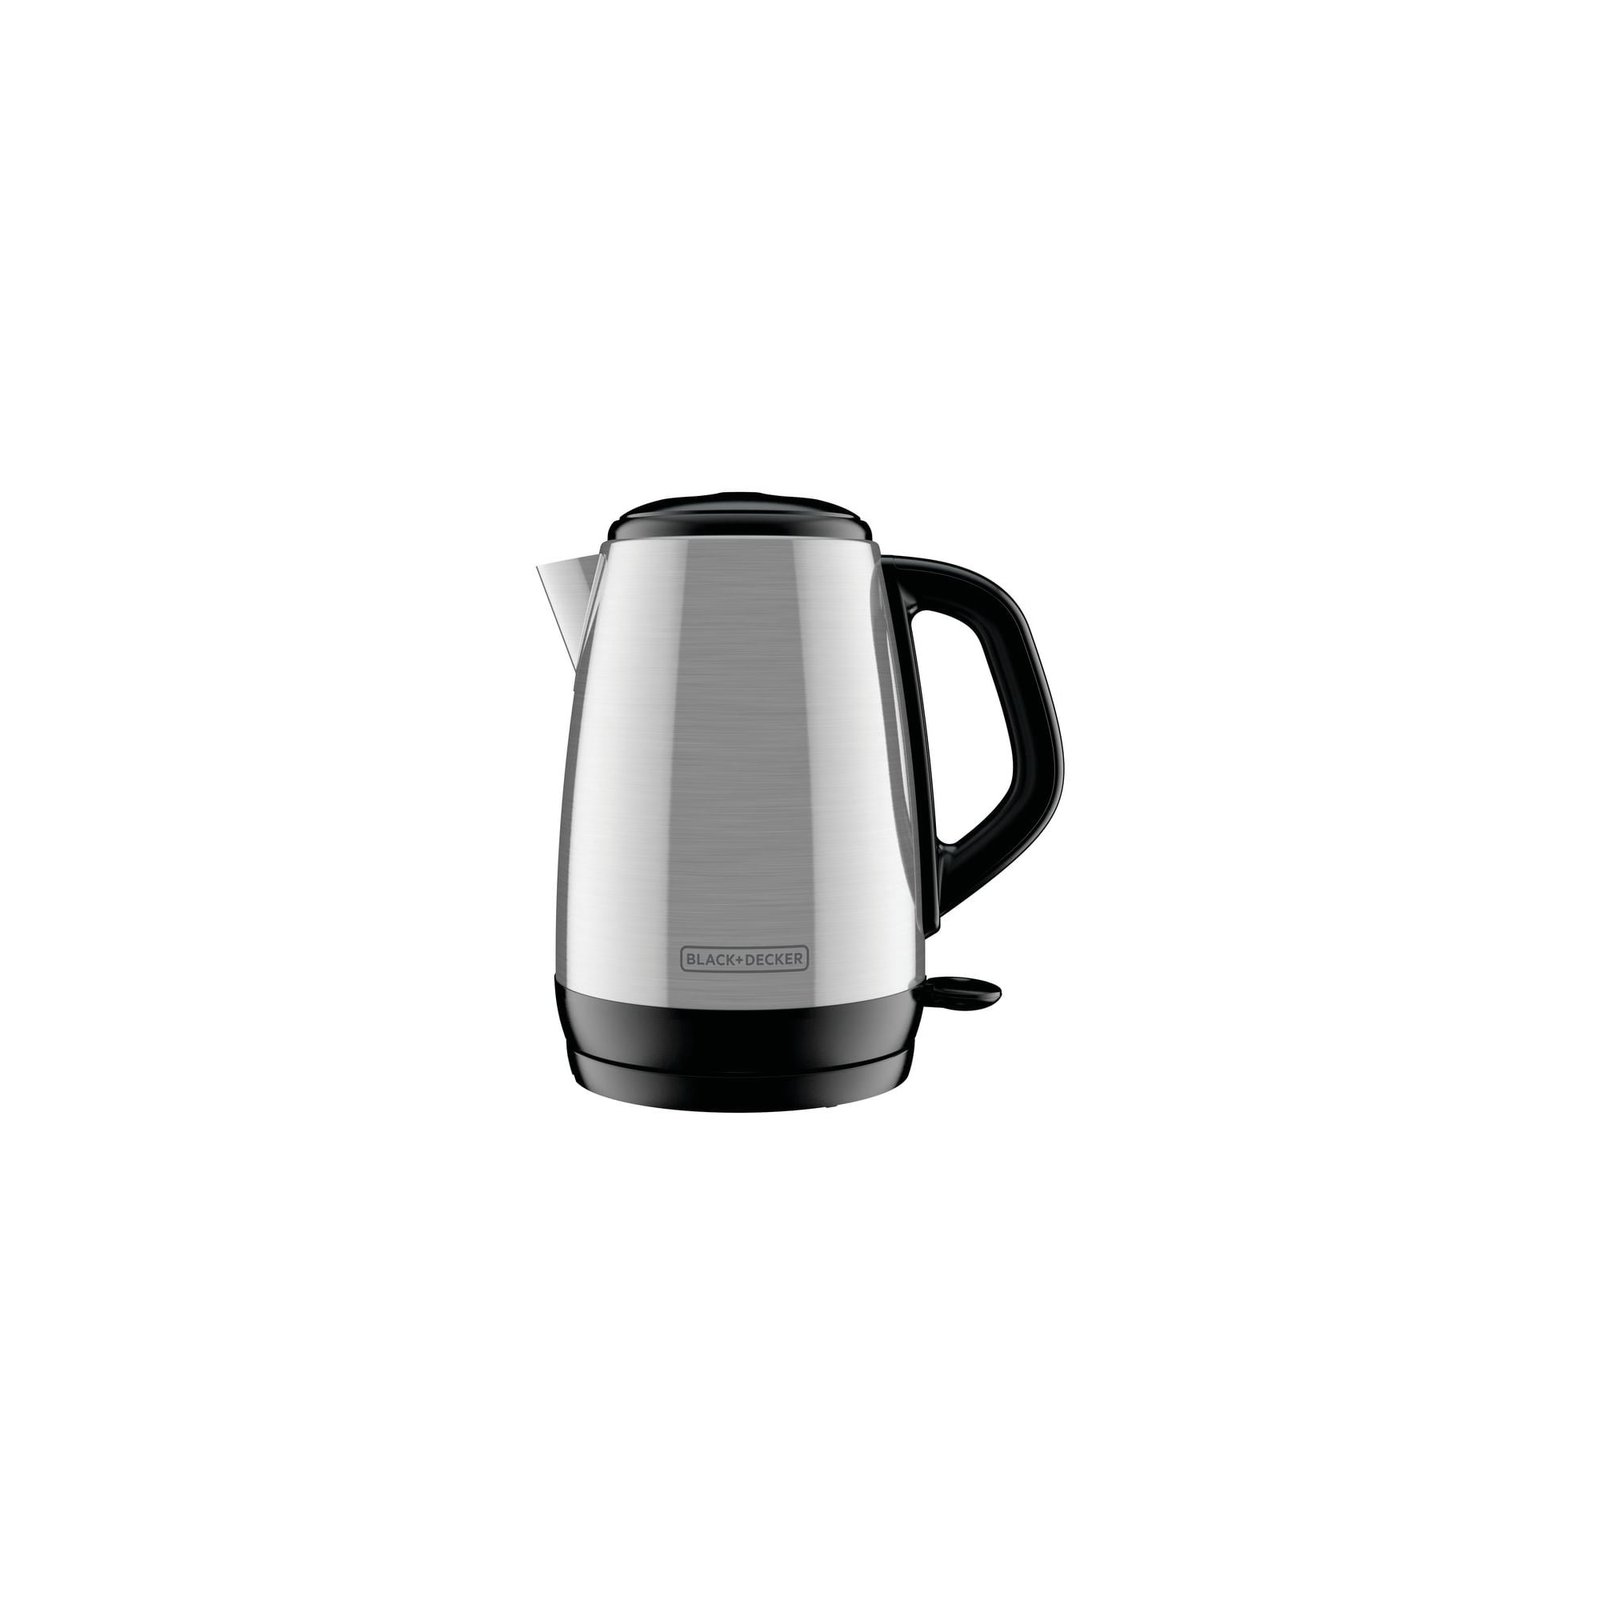 BLACK+DECKER 1.7L Stainless Steel Electric Cordless Kettle